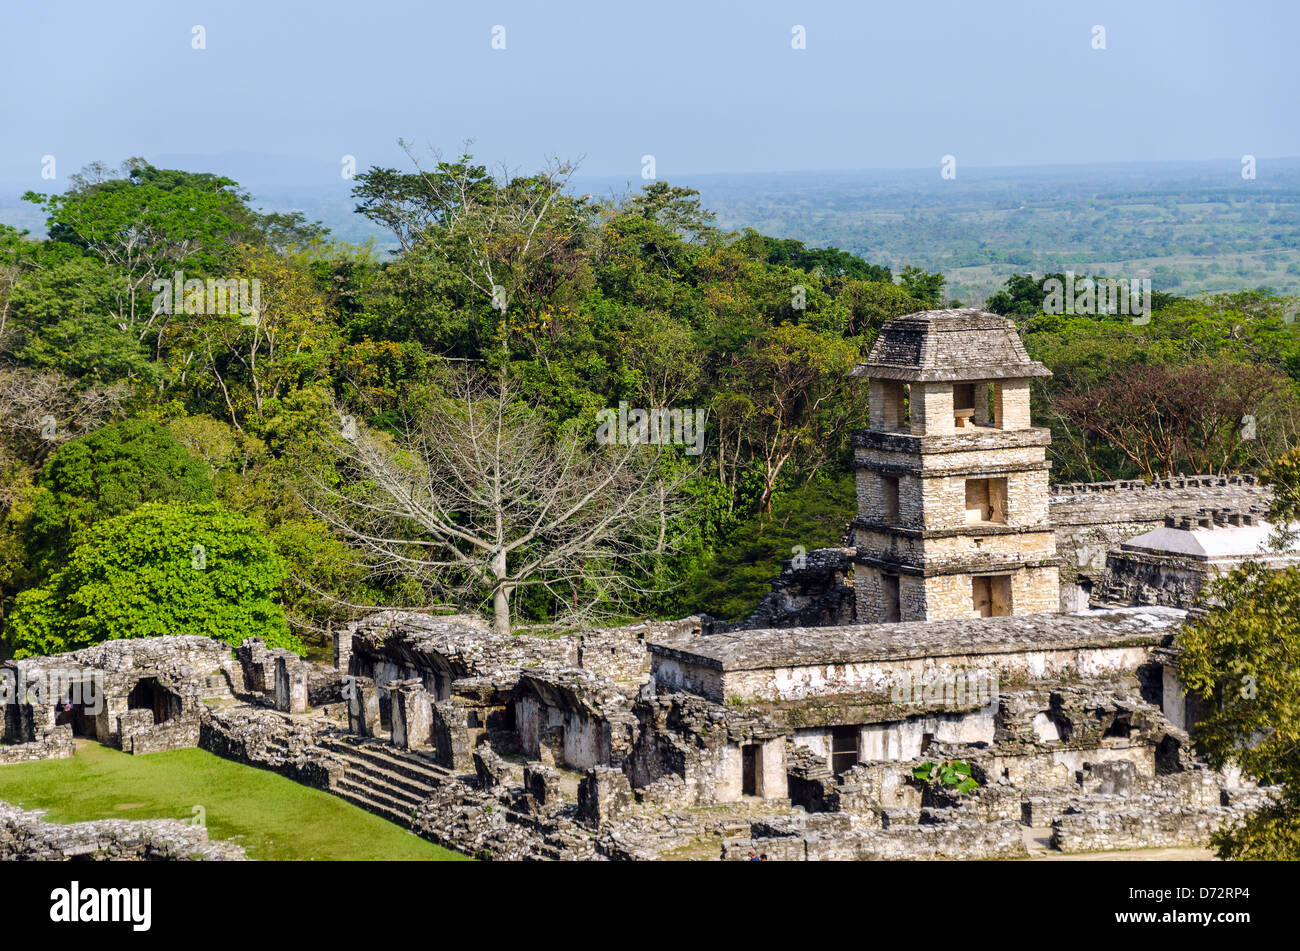 A view of the palace at the ancient Mayan city of Palenque Stock Photo